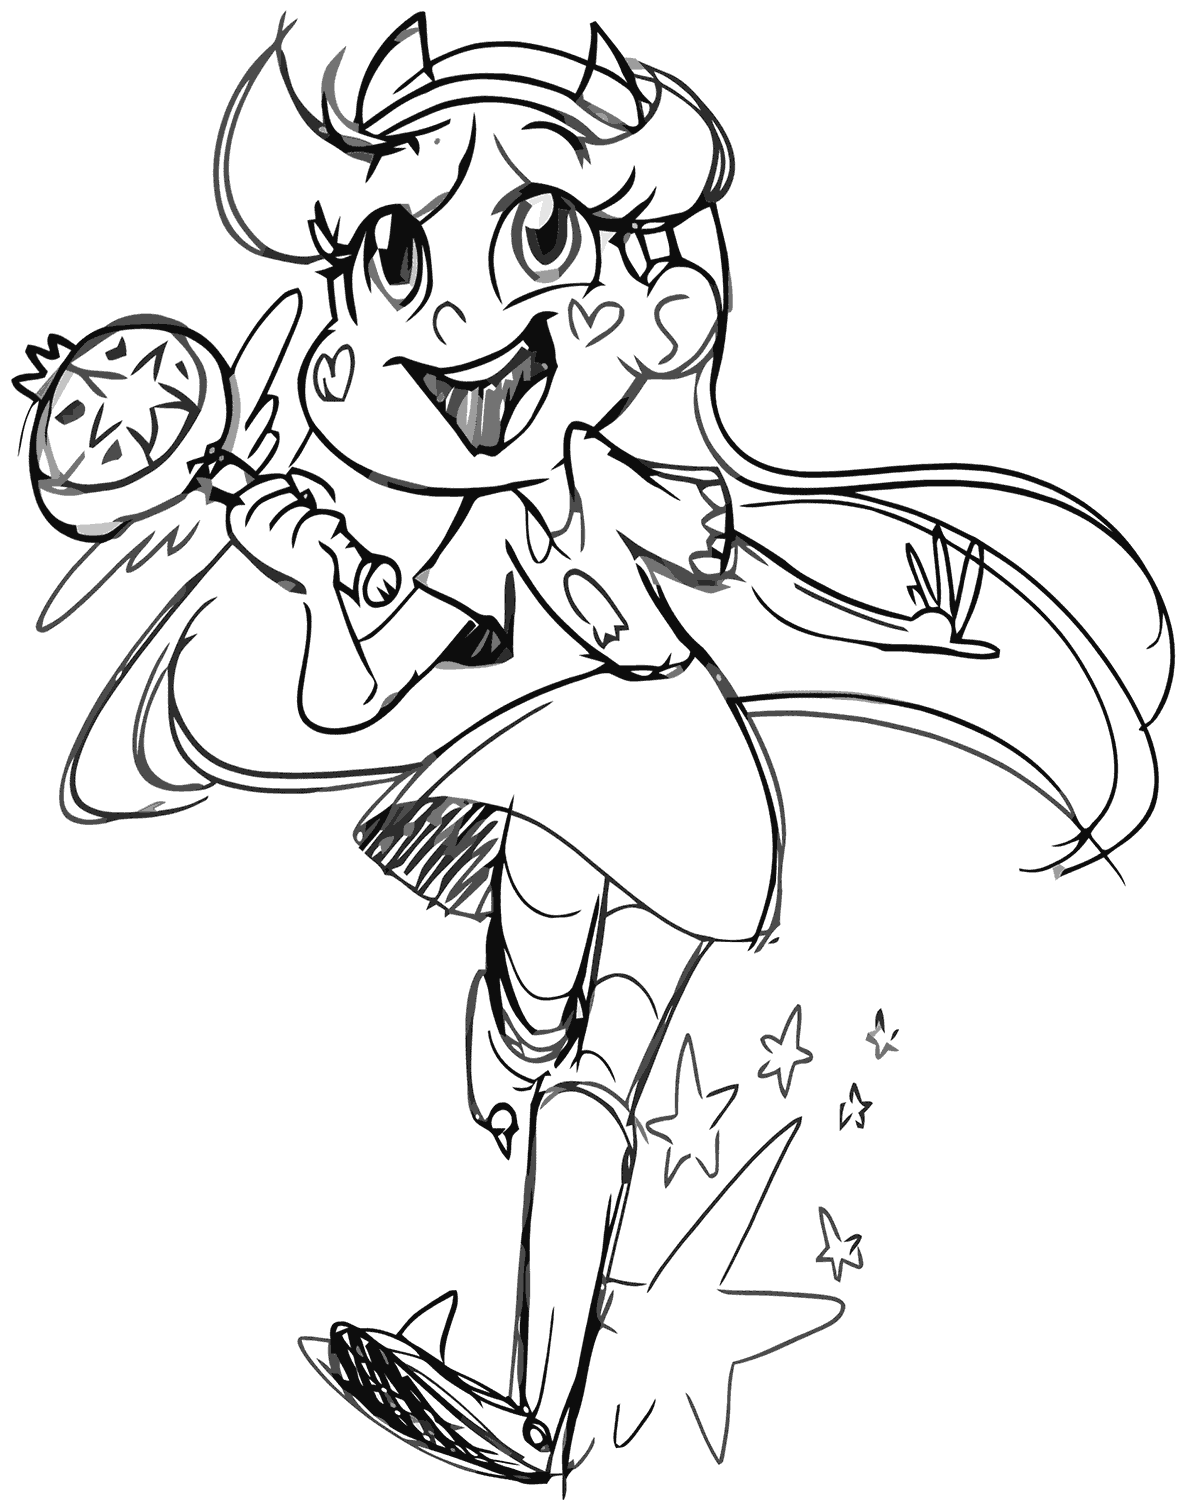 Cool Star Vs The Forces Of Evil 16 Coloring Page